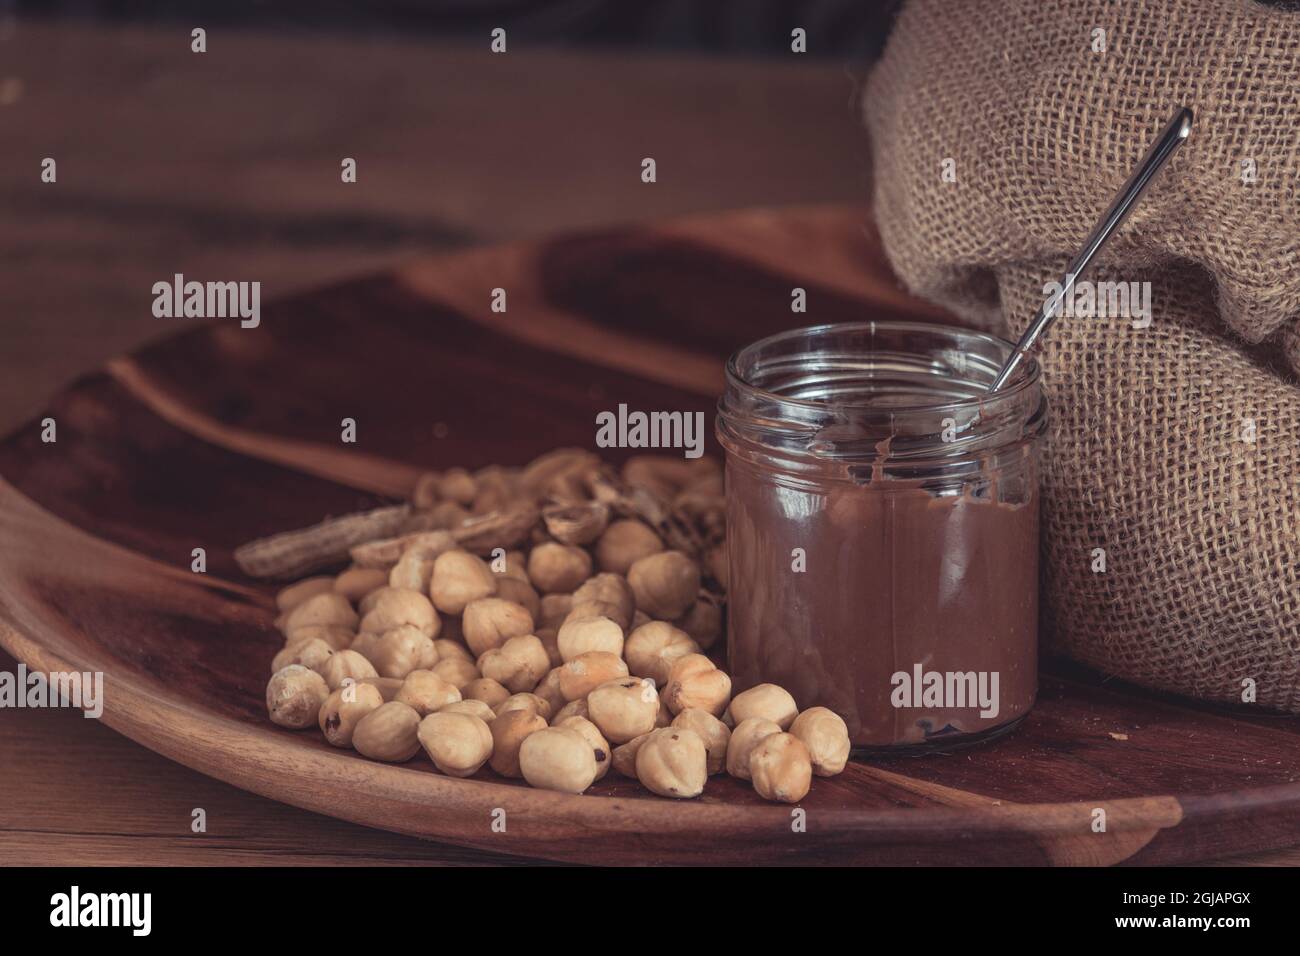 Hazelnuts and chocolate spread accompanied by gunny sack on a wooden plate Stock Photo